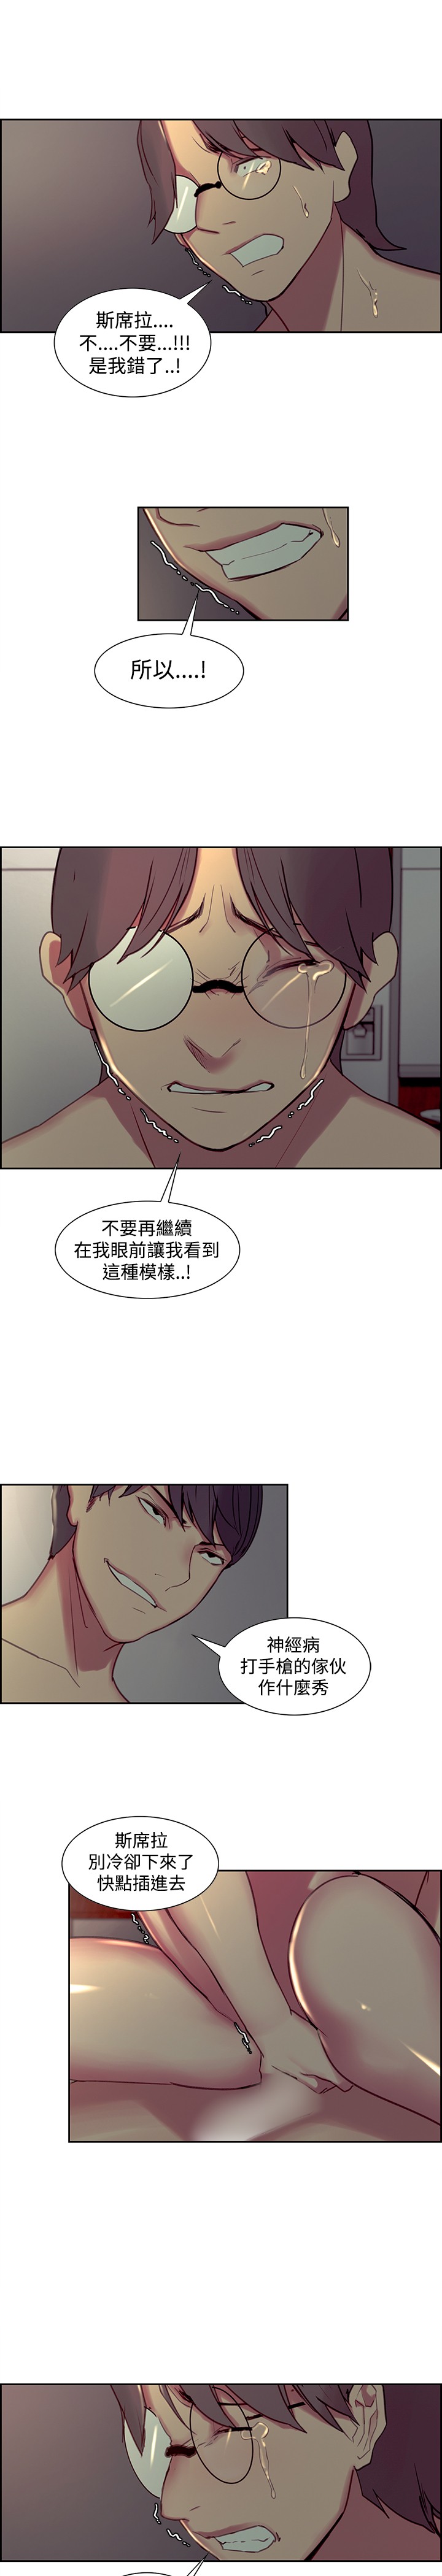 [Serious] Domesticate the Housekeeper 调教家政妇 Ch.29~41 [Chinese]中文 page 13 full